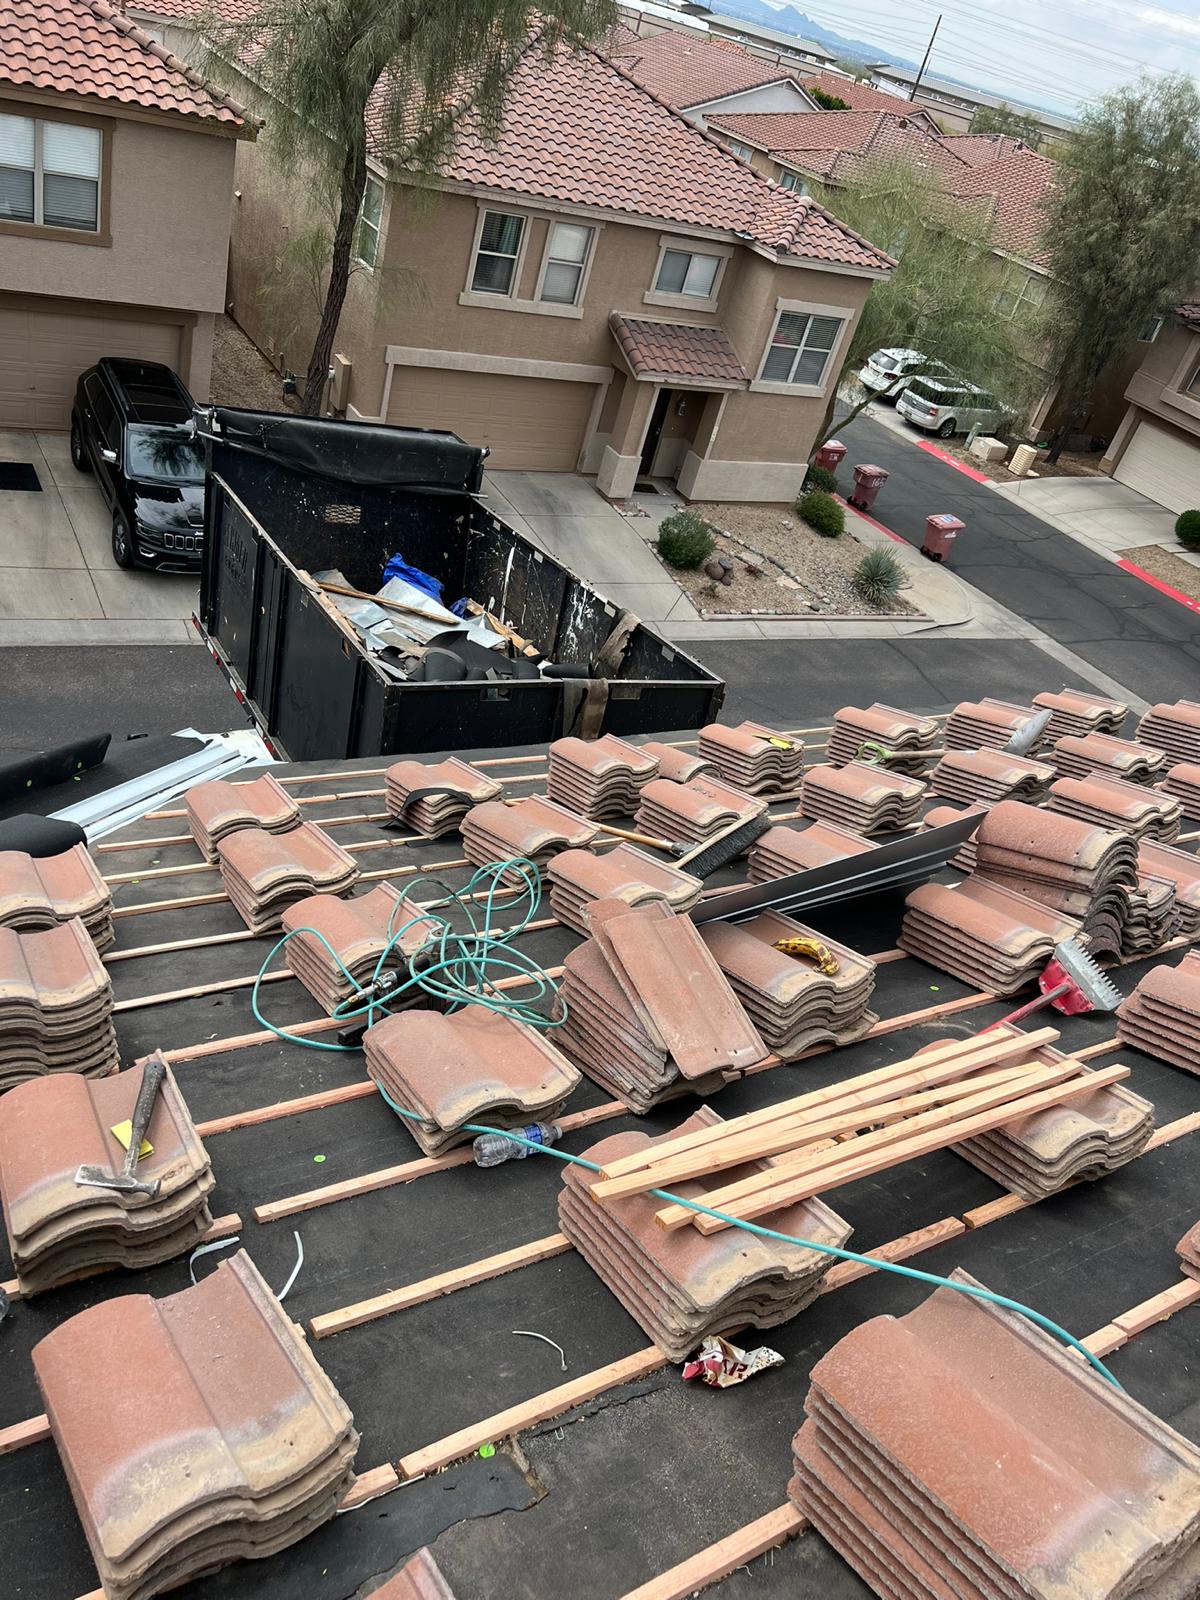 Pile of tiles ready for installation on a Scottsdale dwelling.